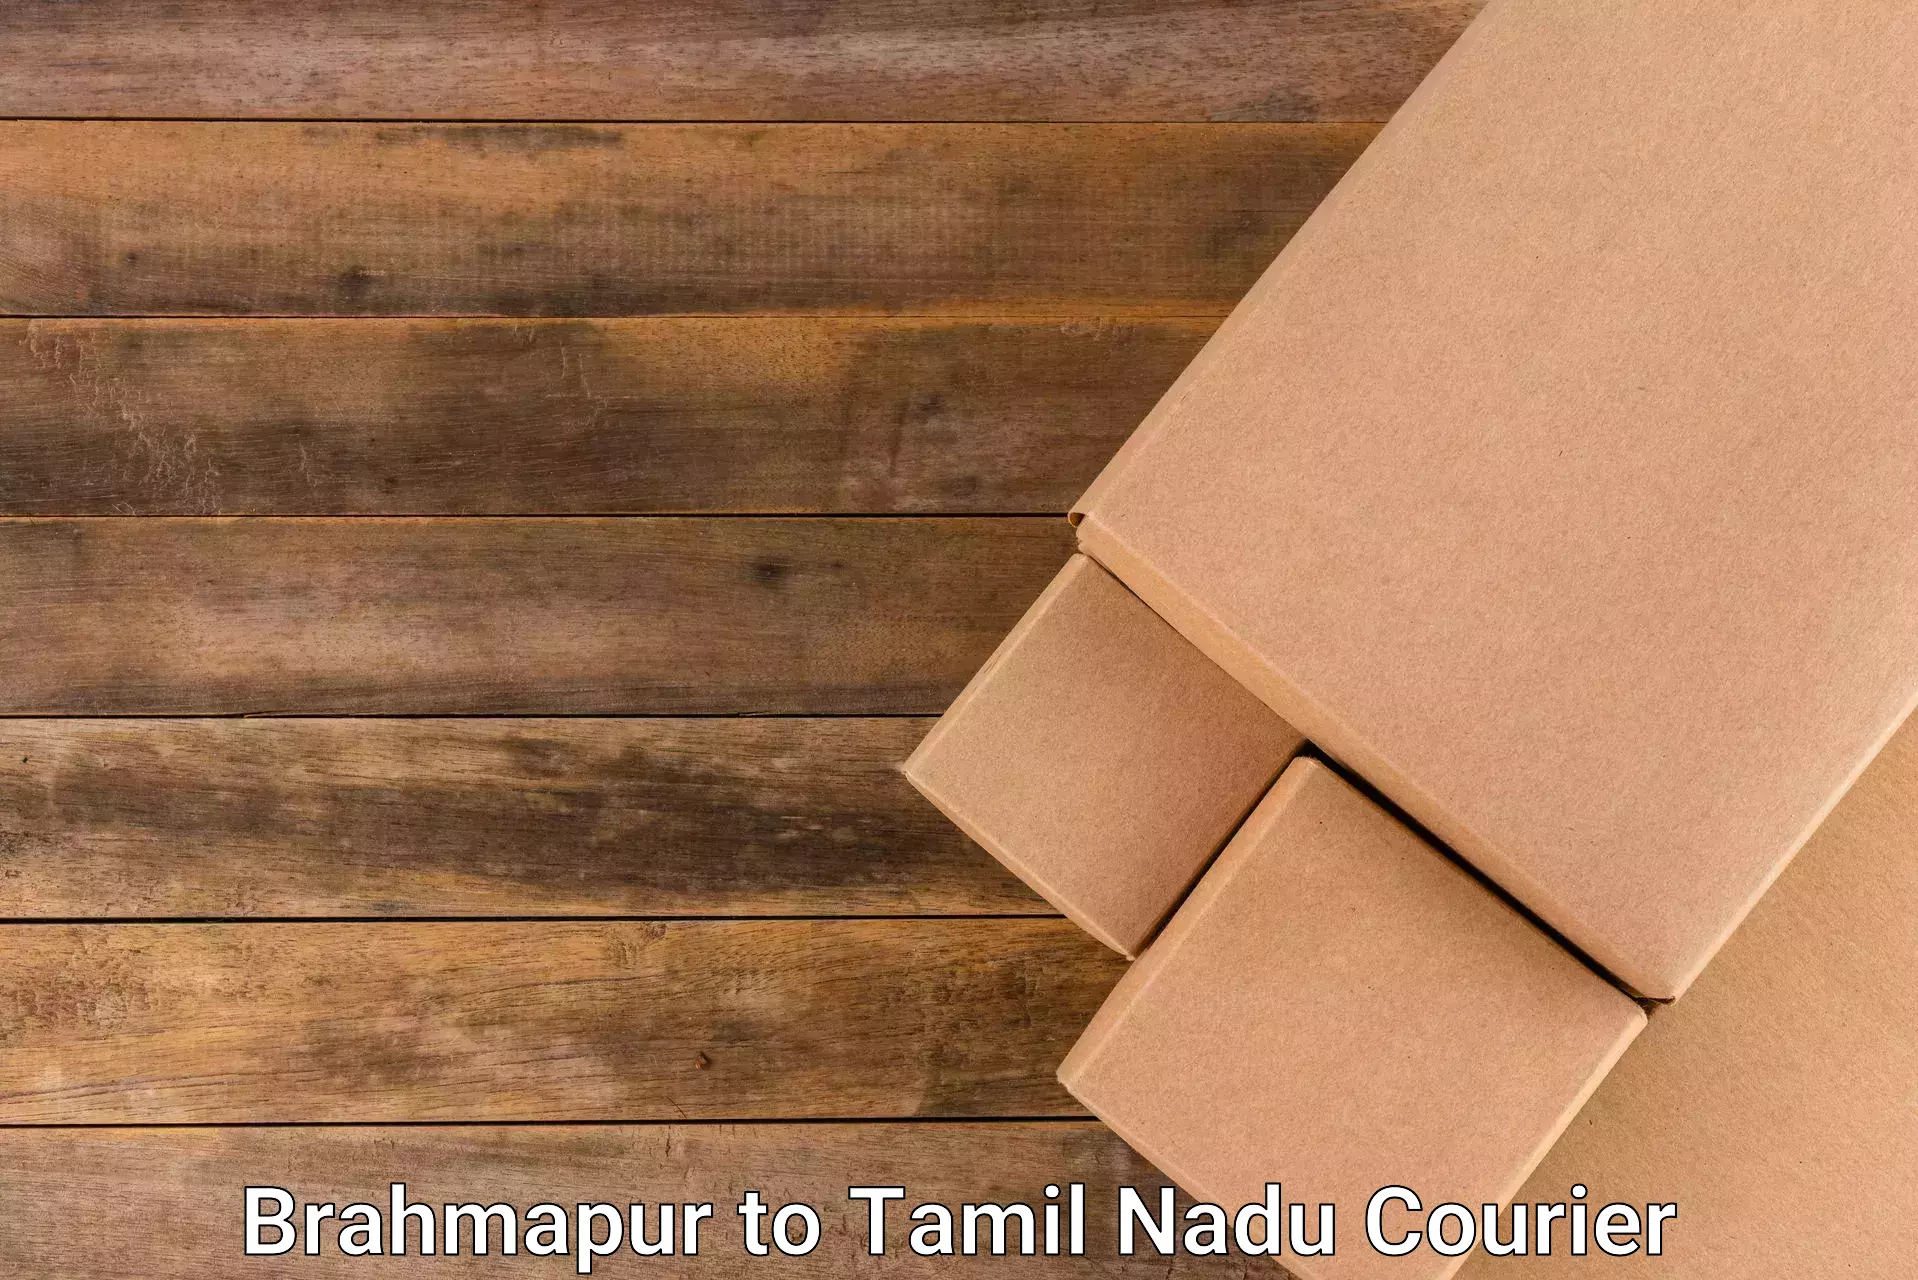 Reliable delivery network Brahmapur to Tamil Nadu